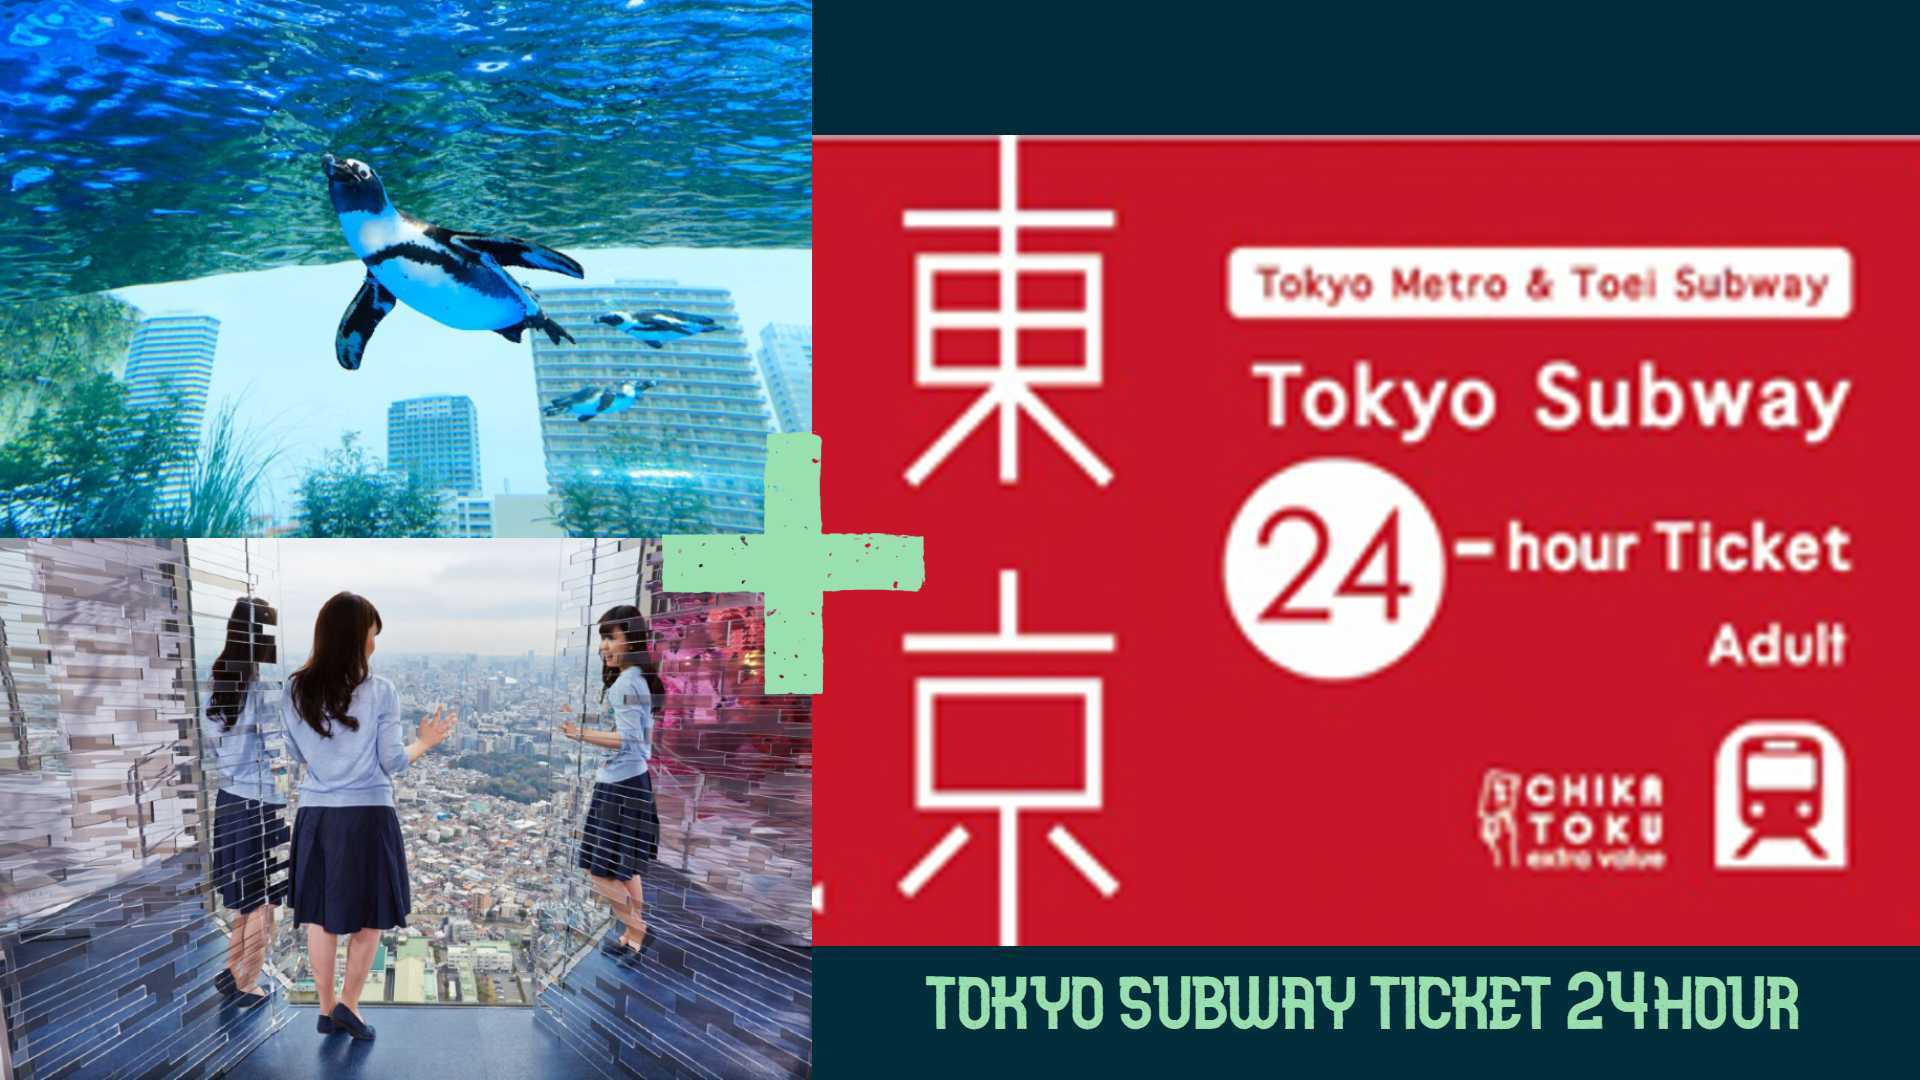 Combo Ticket - Sunshine Aquarium + SKY CIRCUS Sunshine 60 Observatory and Tokyo Subway Ticket (24-hour) [Save up to JPY 800!]